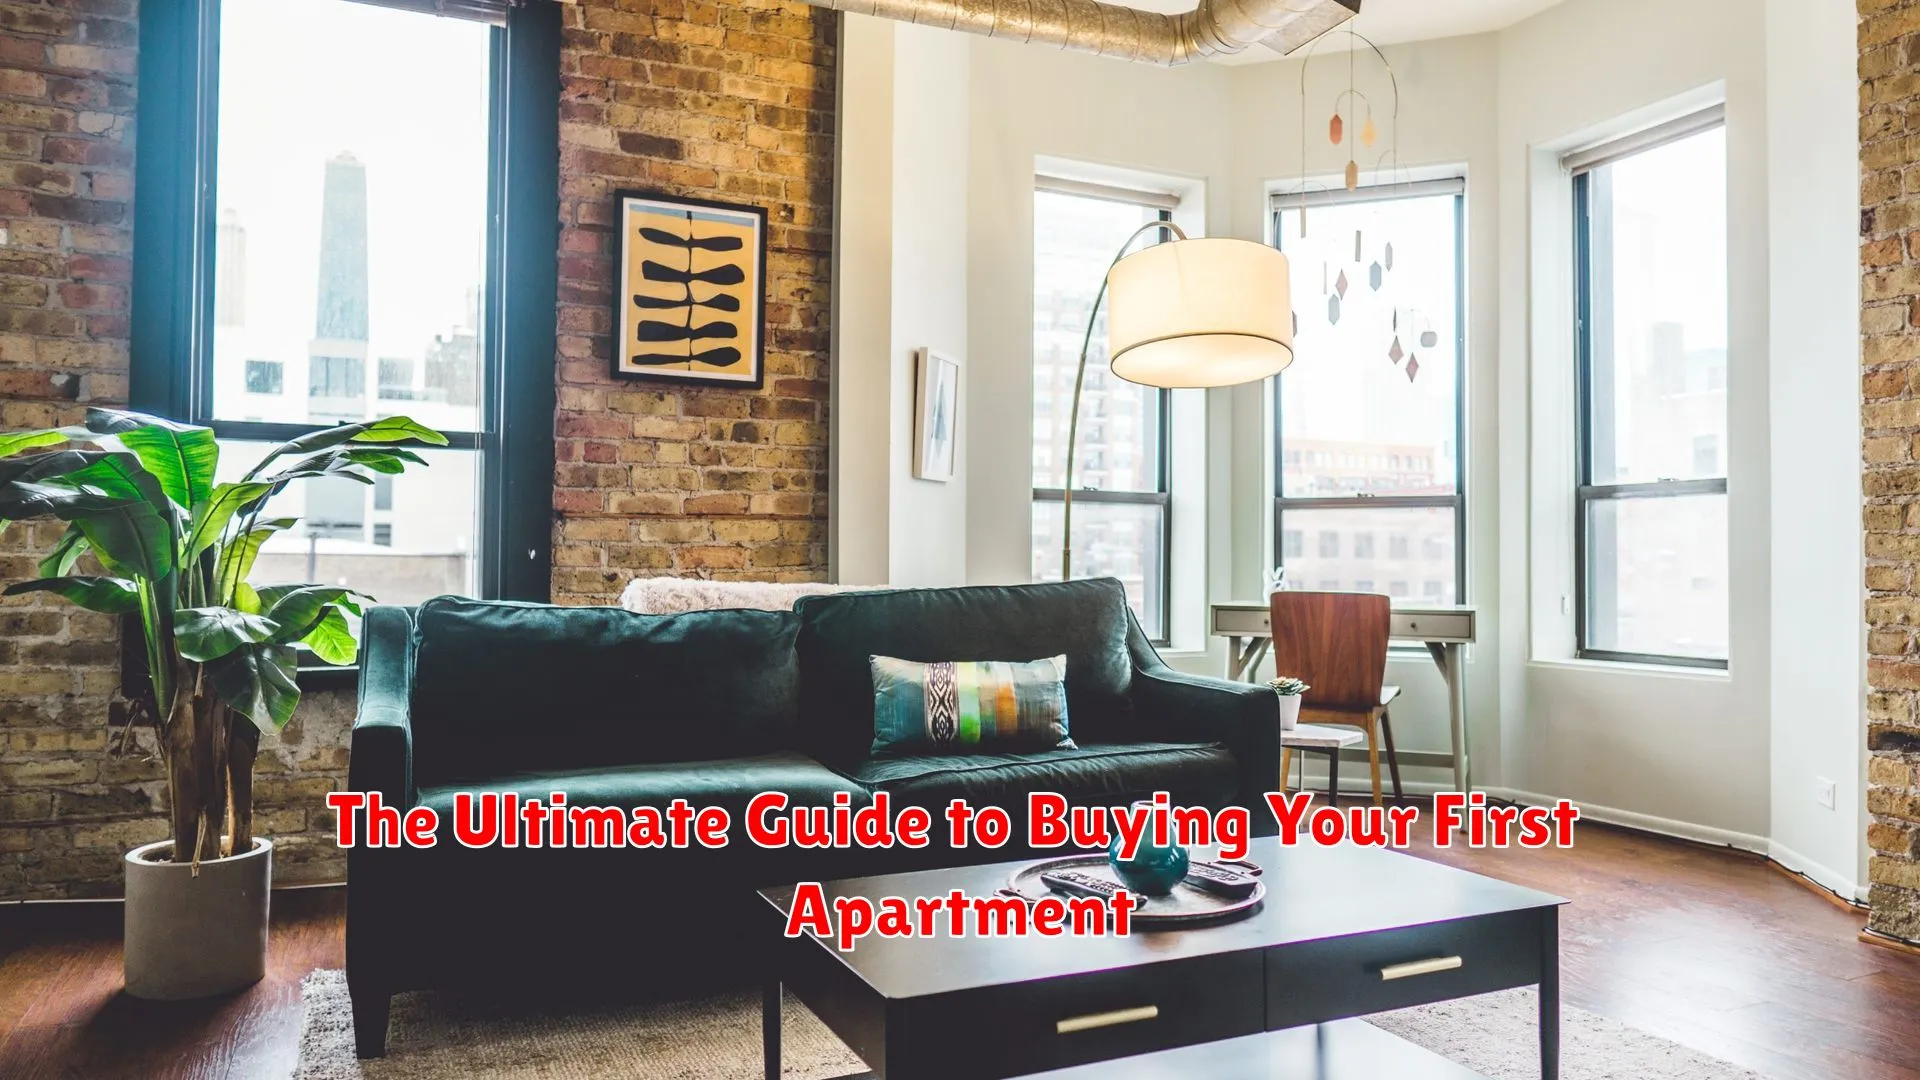 The Ultimate Guide to Buying Your First Apartment